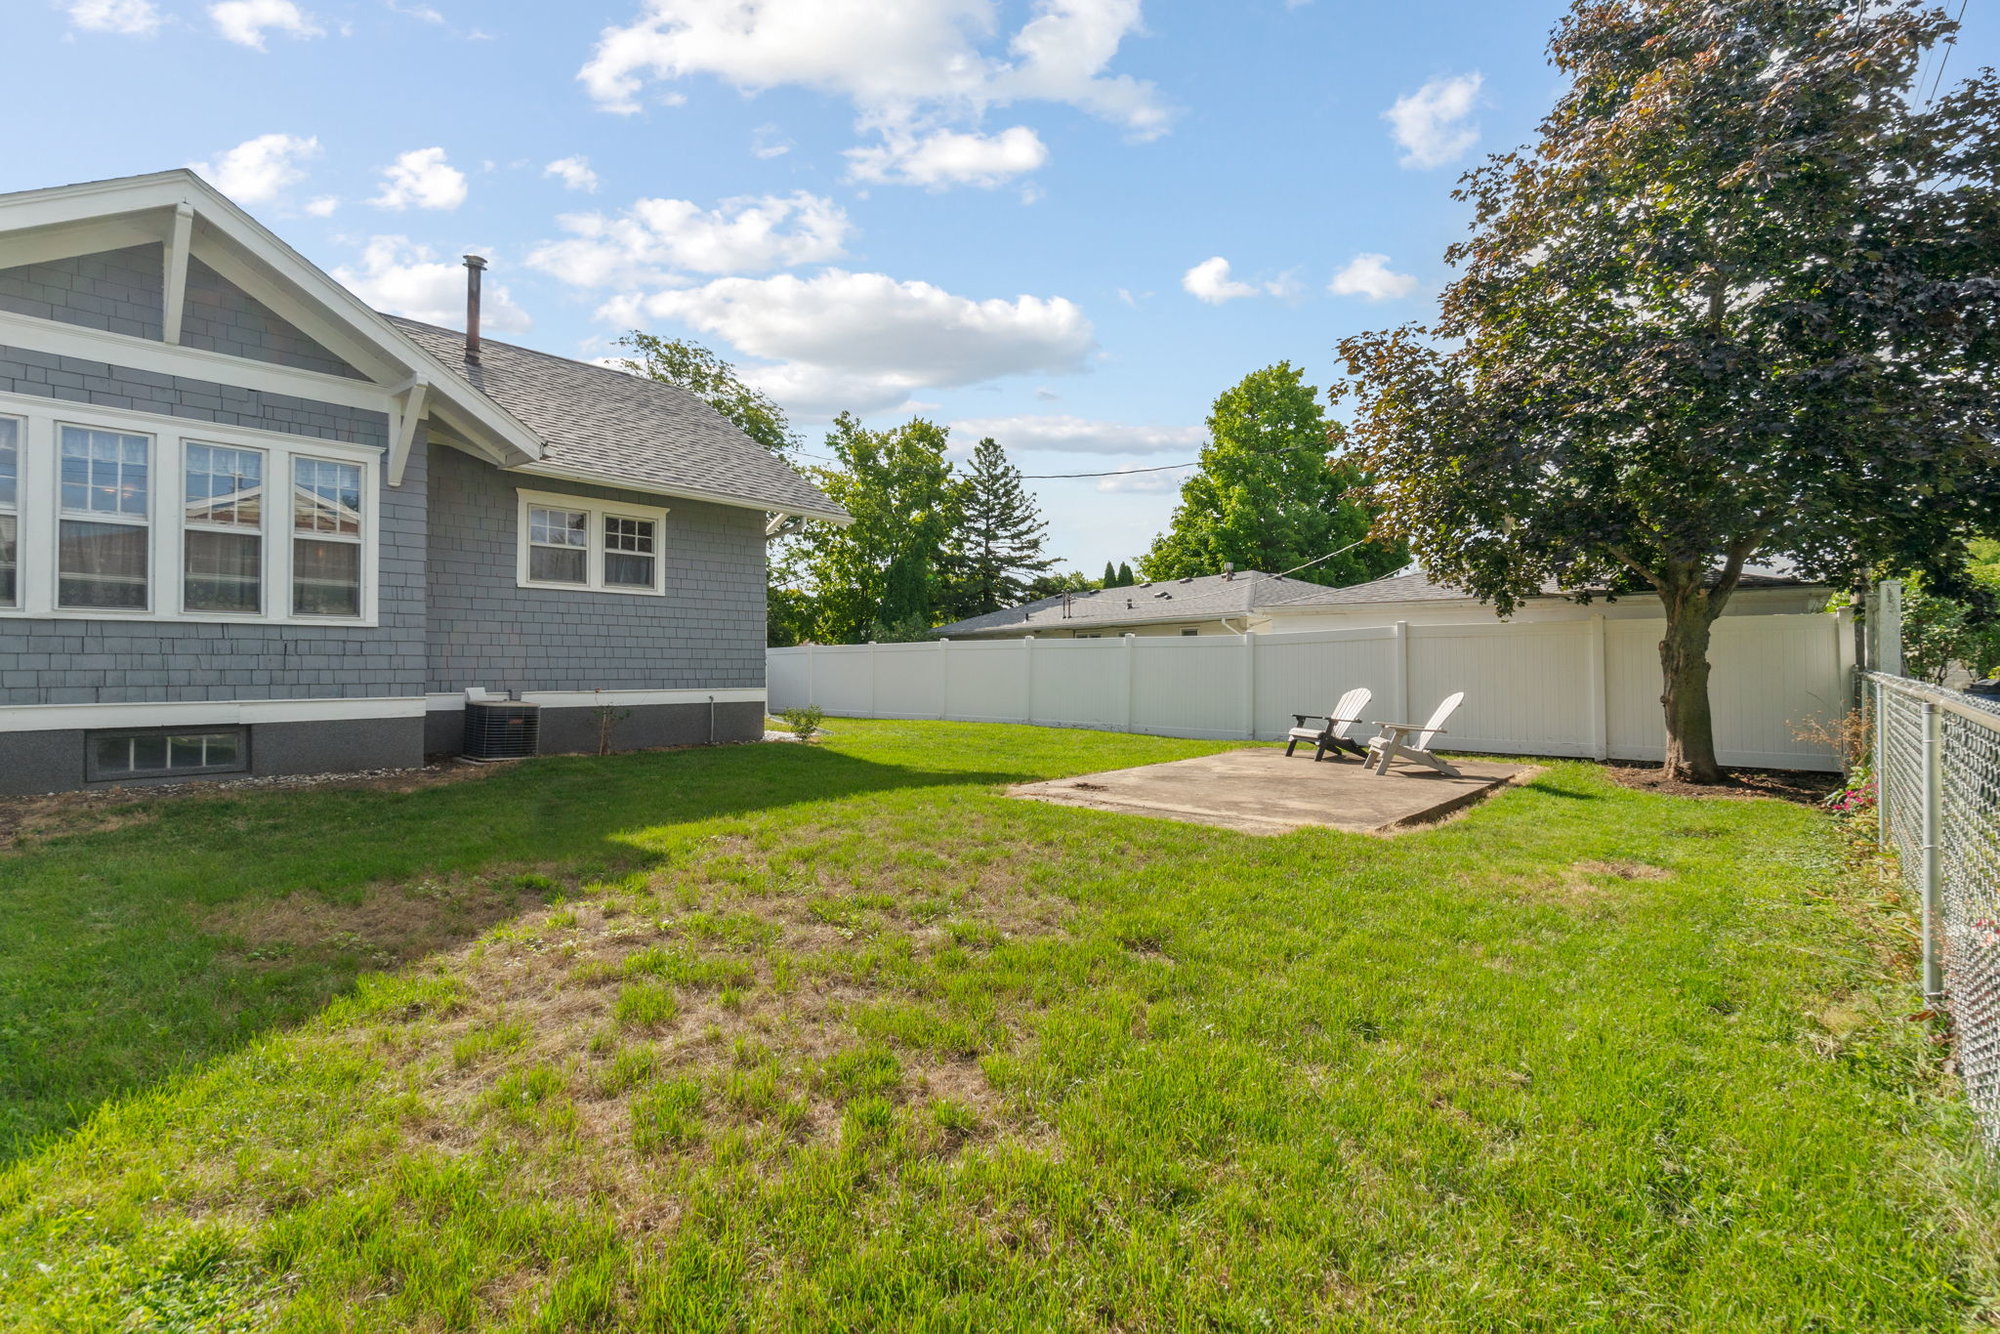 Tucked Back off Ridgeway Ave You will Find this Adorable Bungalow